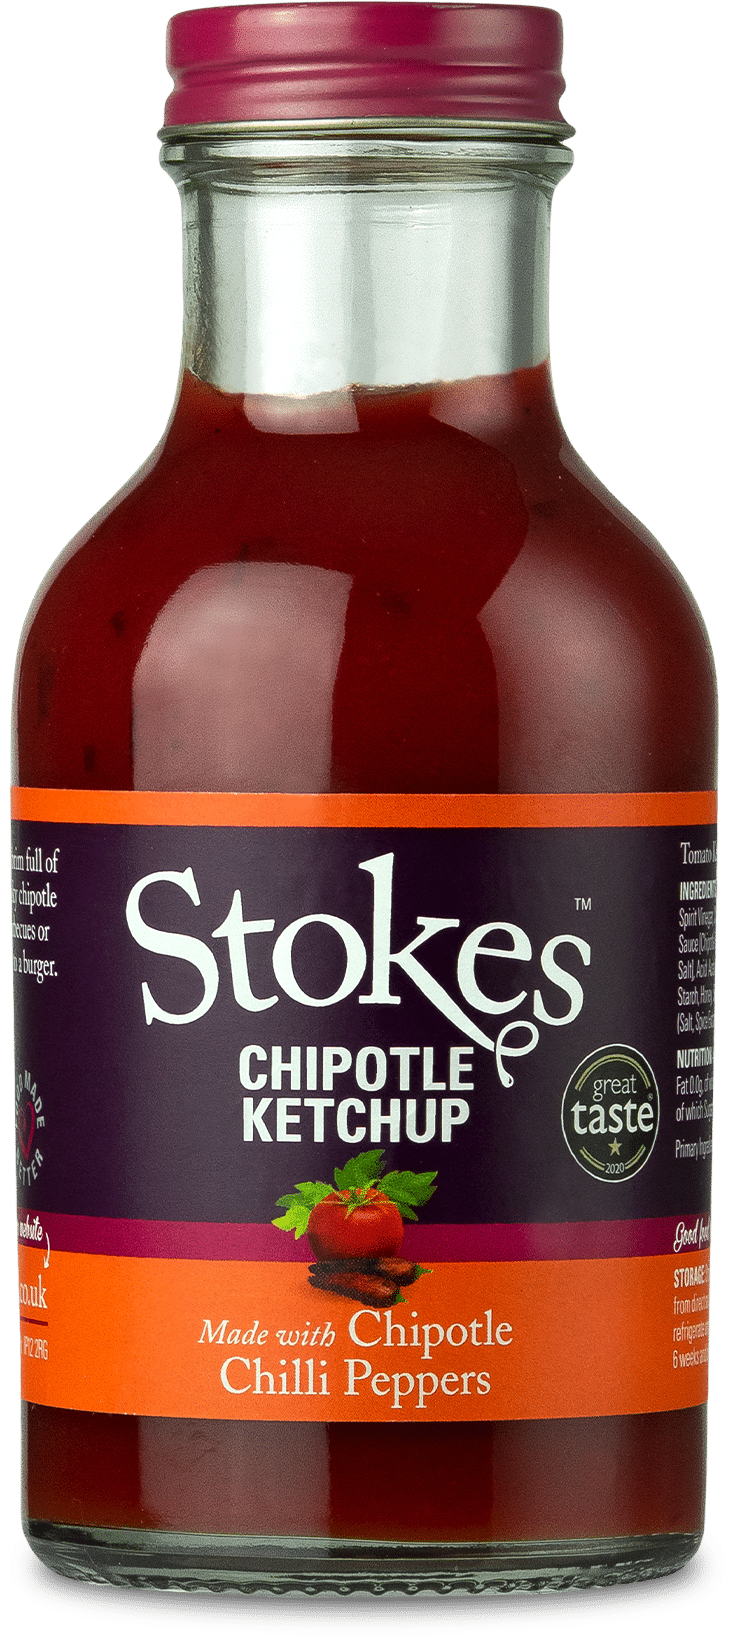 Chipotle Ketchup - Stokes Sauces